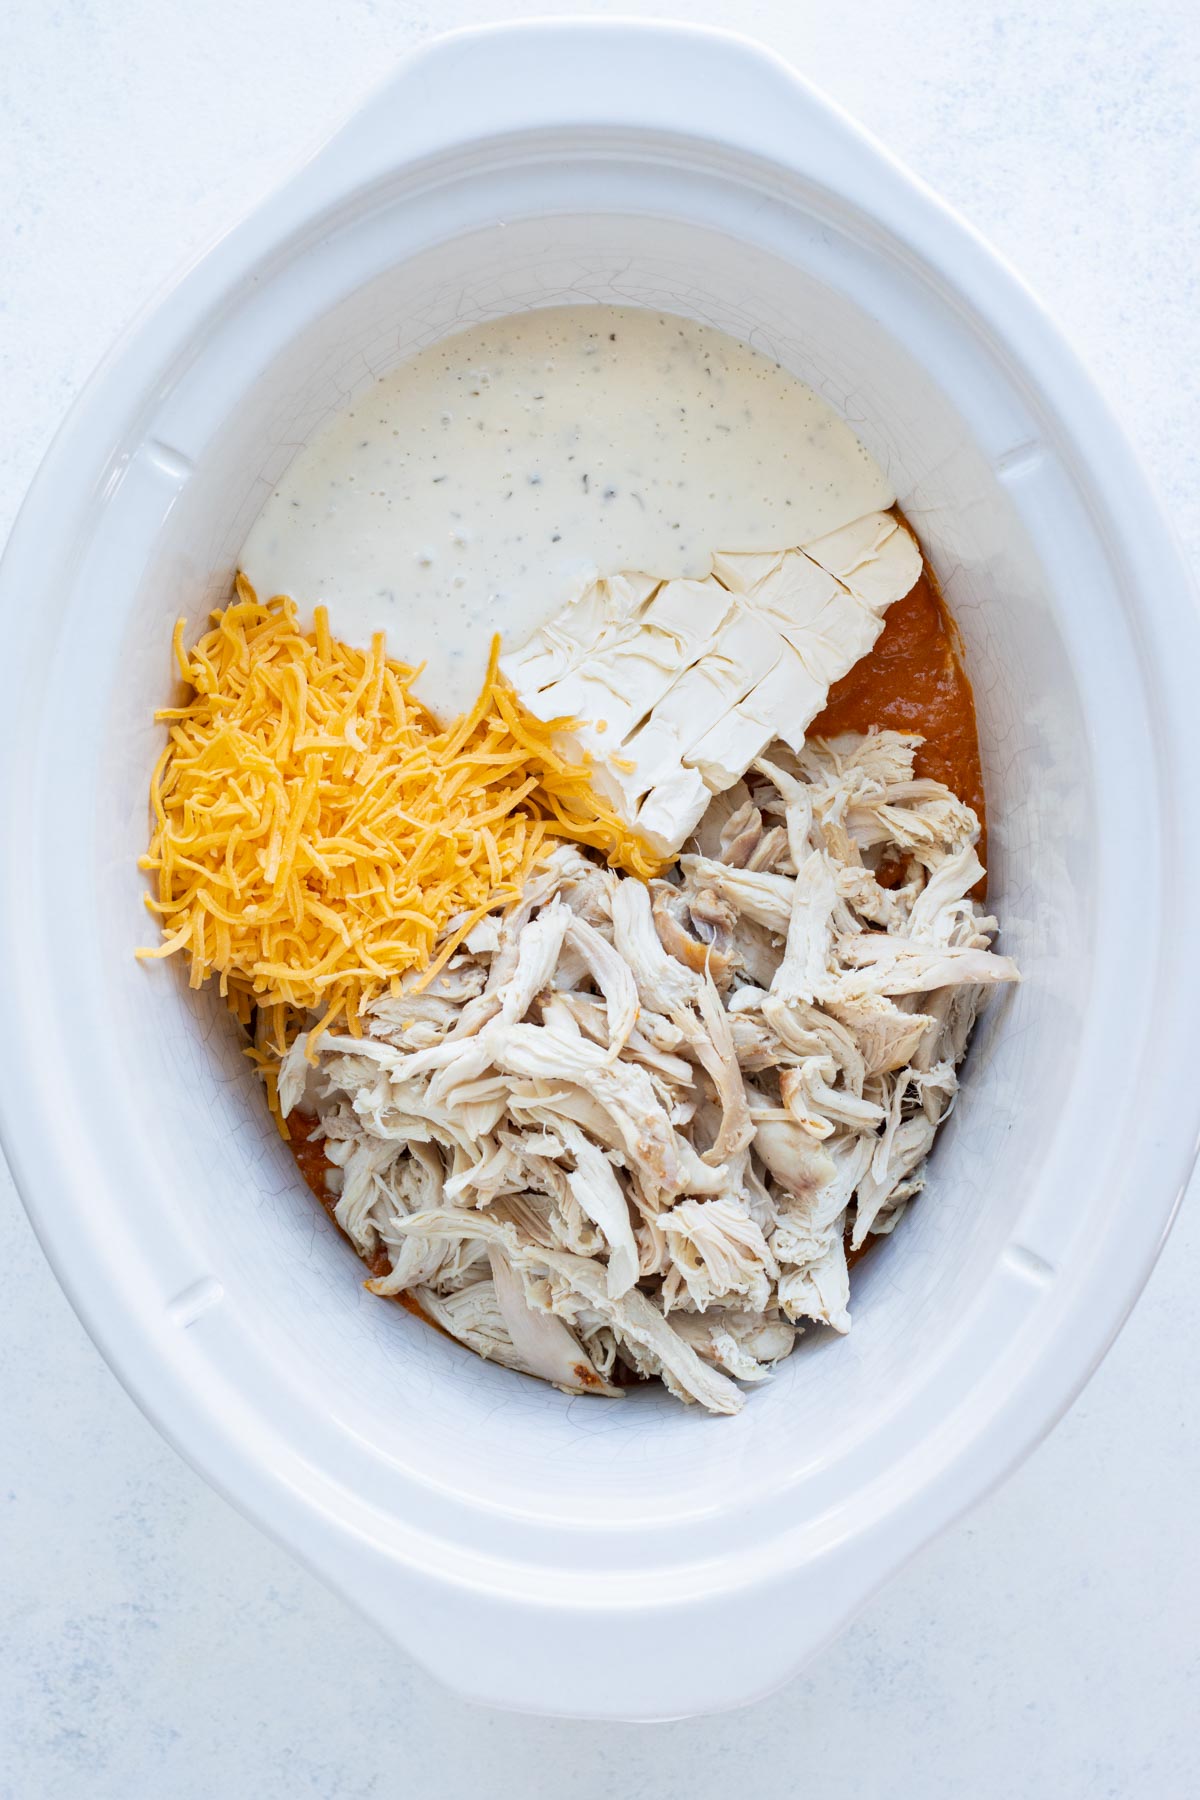 Cream cheese, cheddar cheese, ranch, and shredded chicken are added to the crockpot.